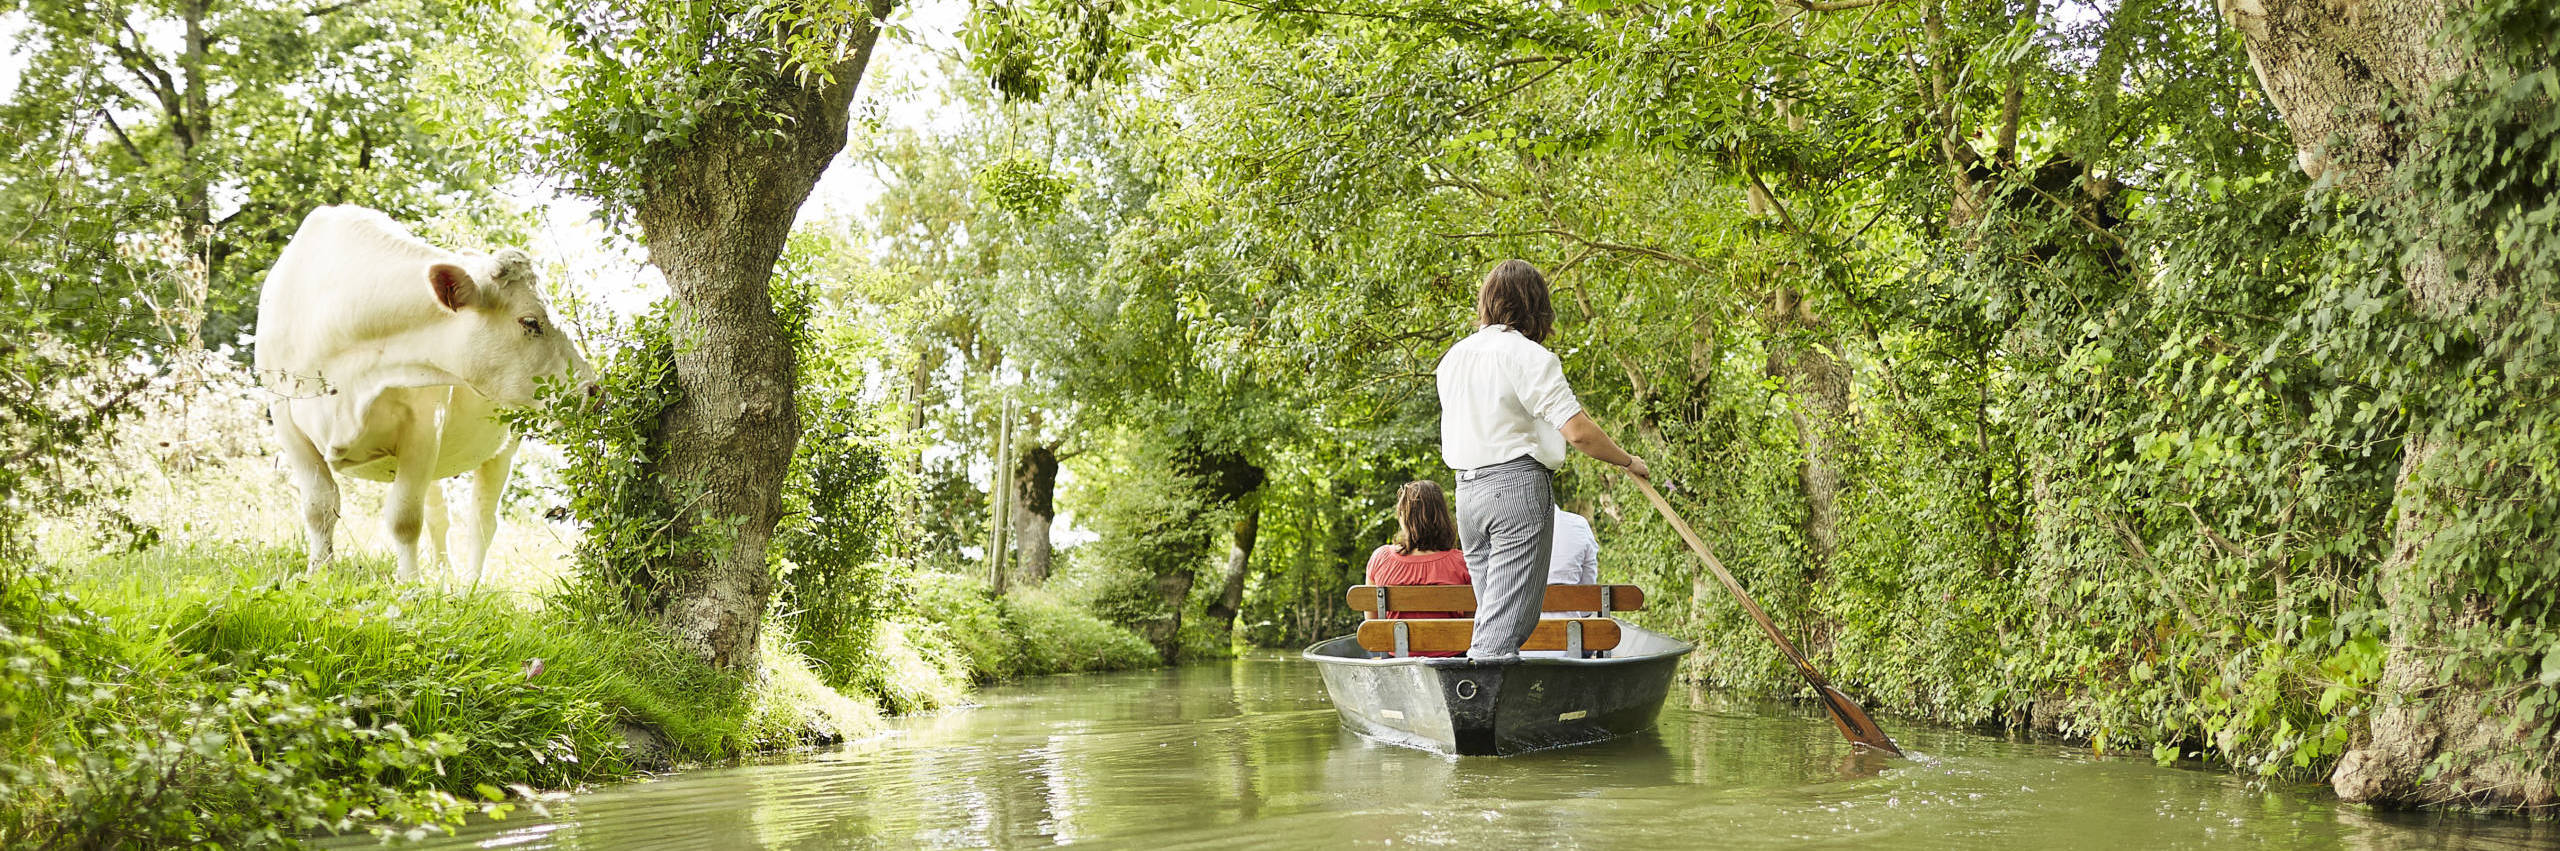 A getaway for two in the Marais poitevin